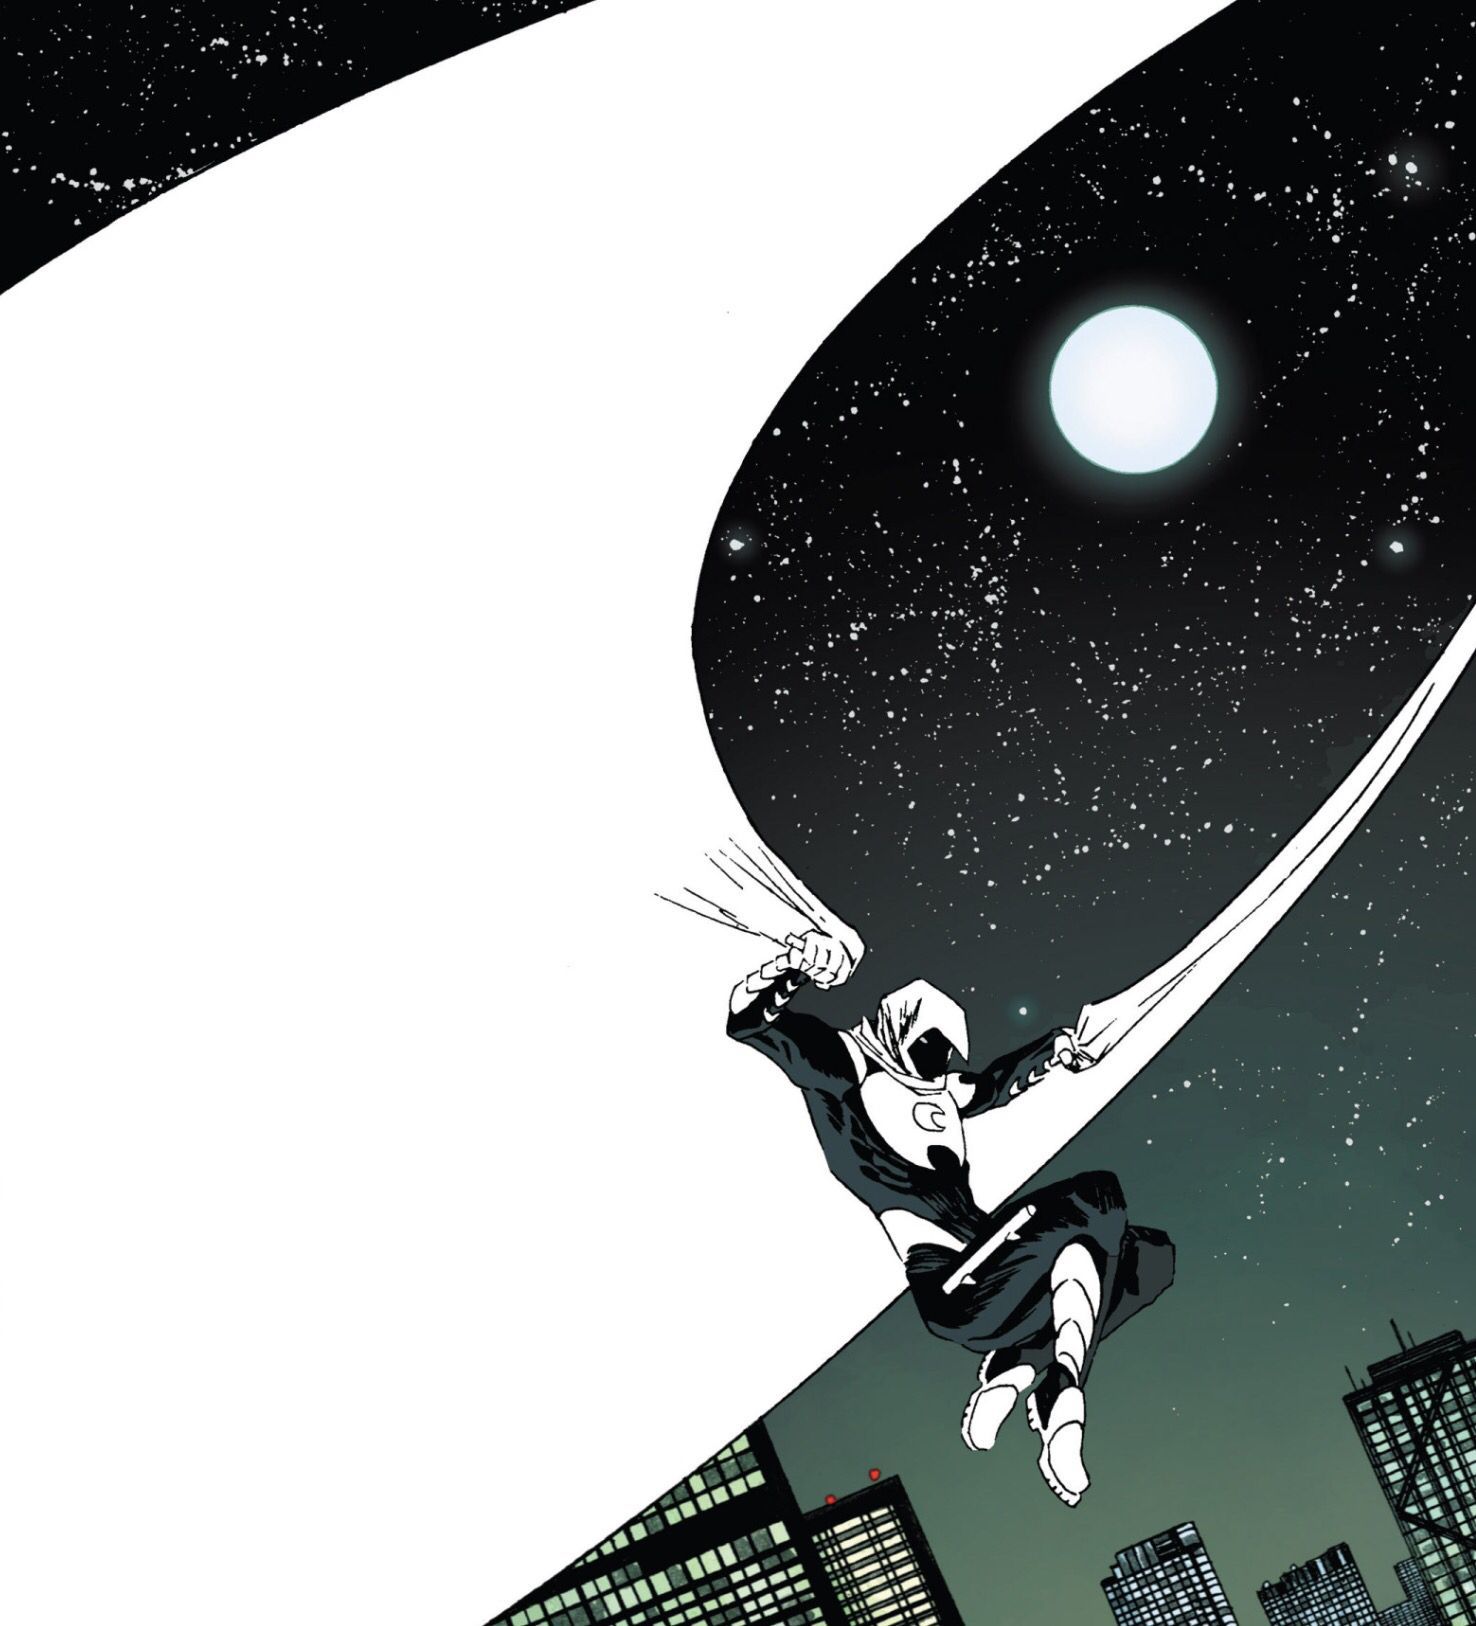 Moon Knight (2022) directed by Mohamed Diab, Justin Benson et al